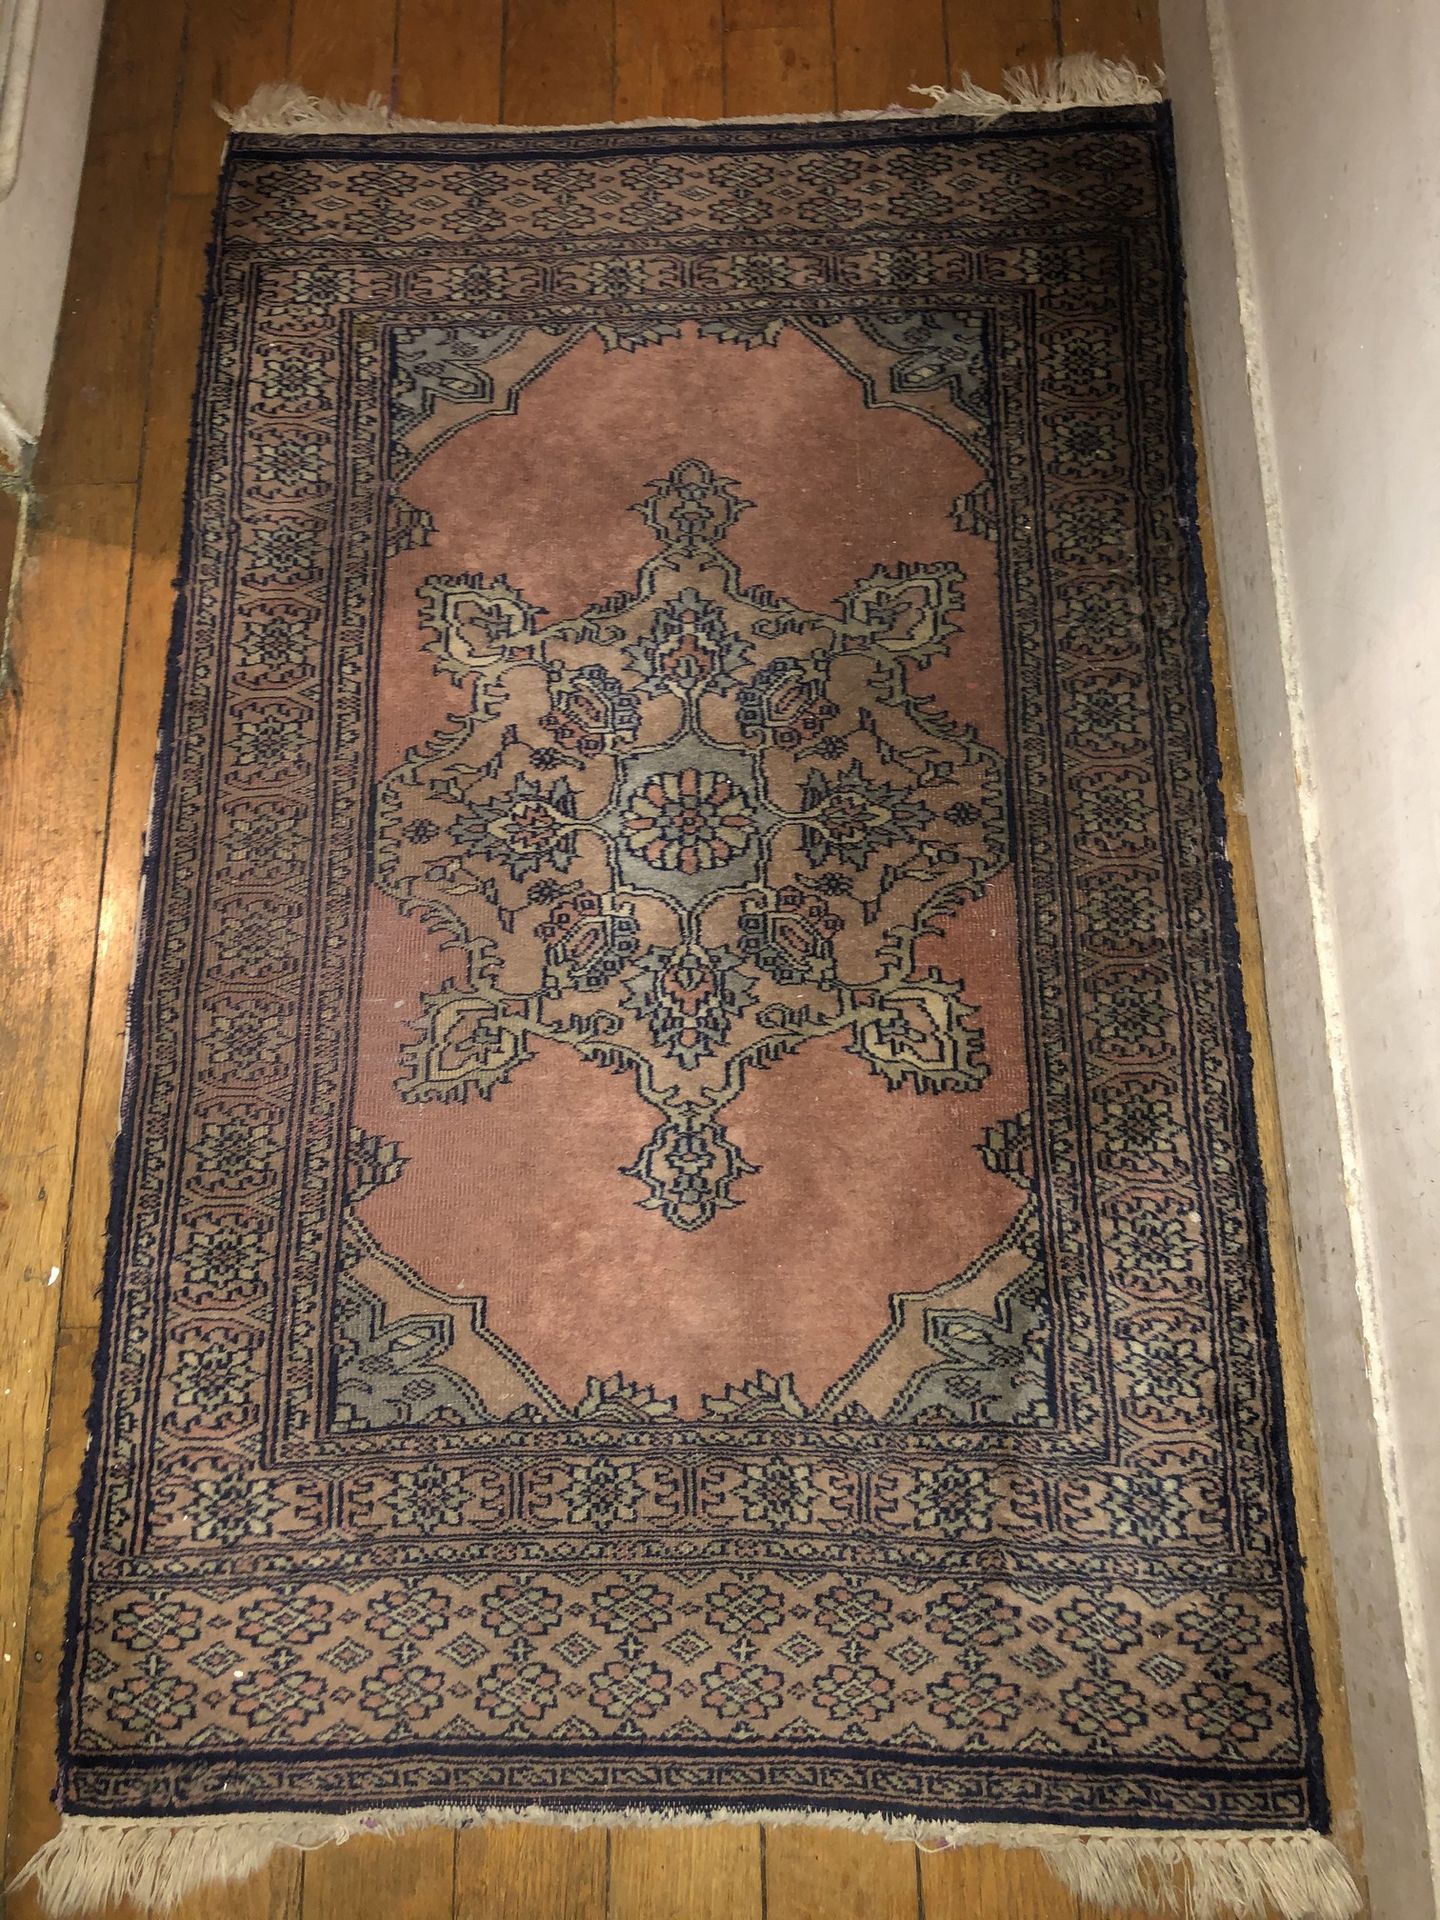 Null Small carpet with pink background, Pakistan

122 x 74 cm